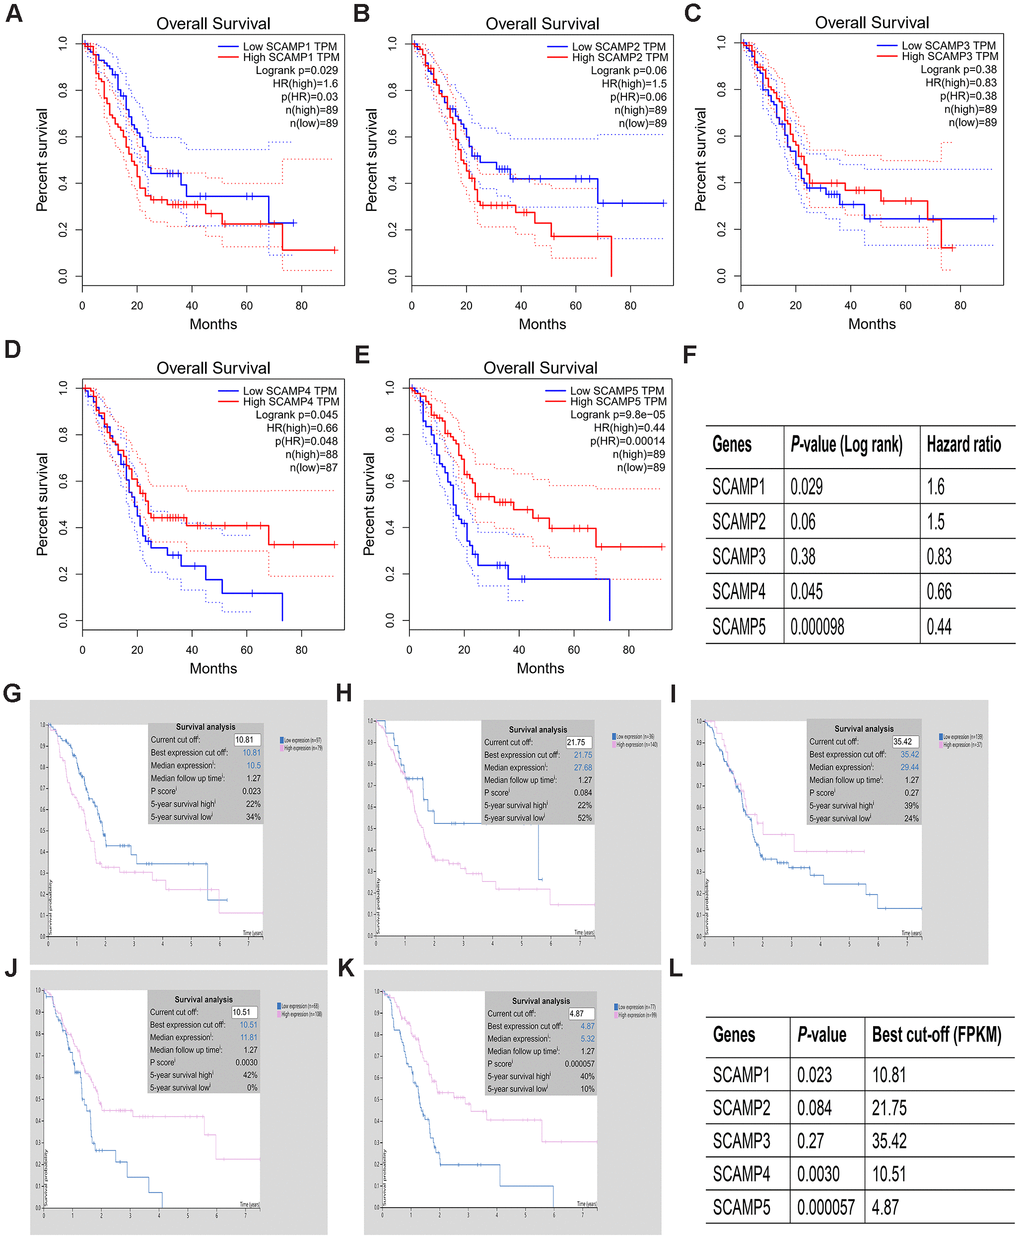 Prognostic value of SCAMP expression in PAAD patients (HPA and GEPIA). (A–L). Prognostic value of SCAMP expression in PAAD patients according to GEPIA (A–F) and HPA (G–L) databases.